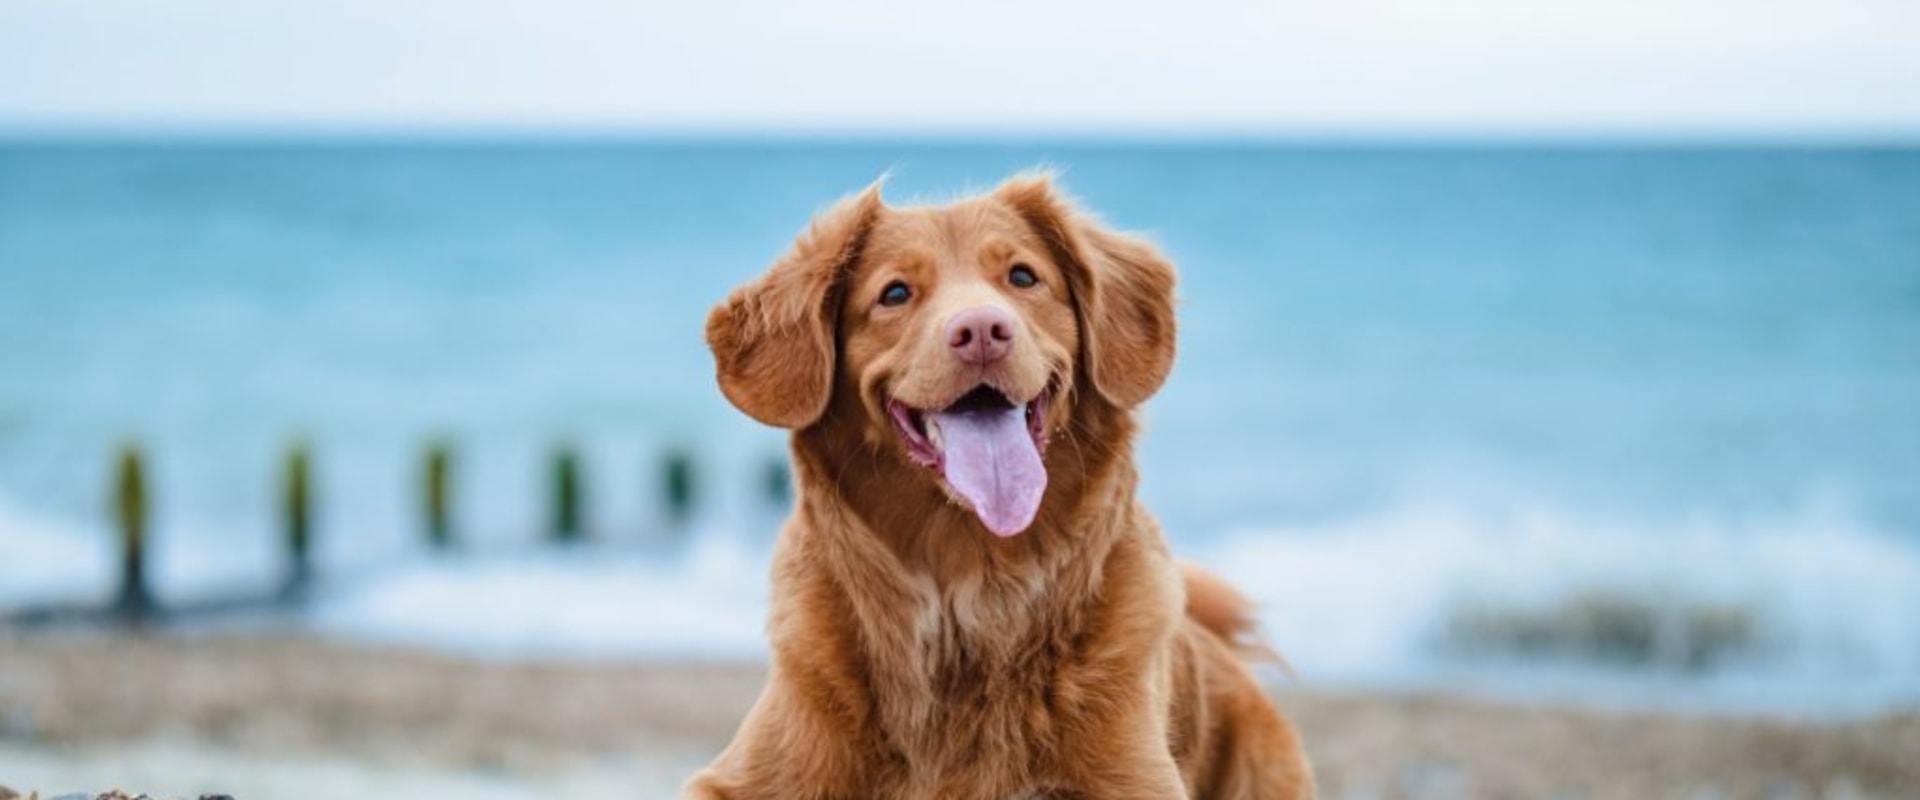 Which los angeles beaches allow dogs?